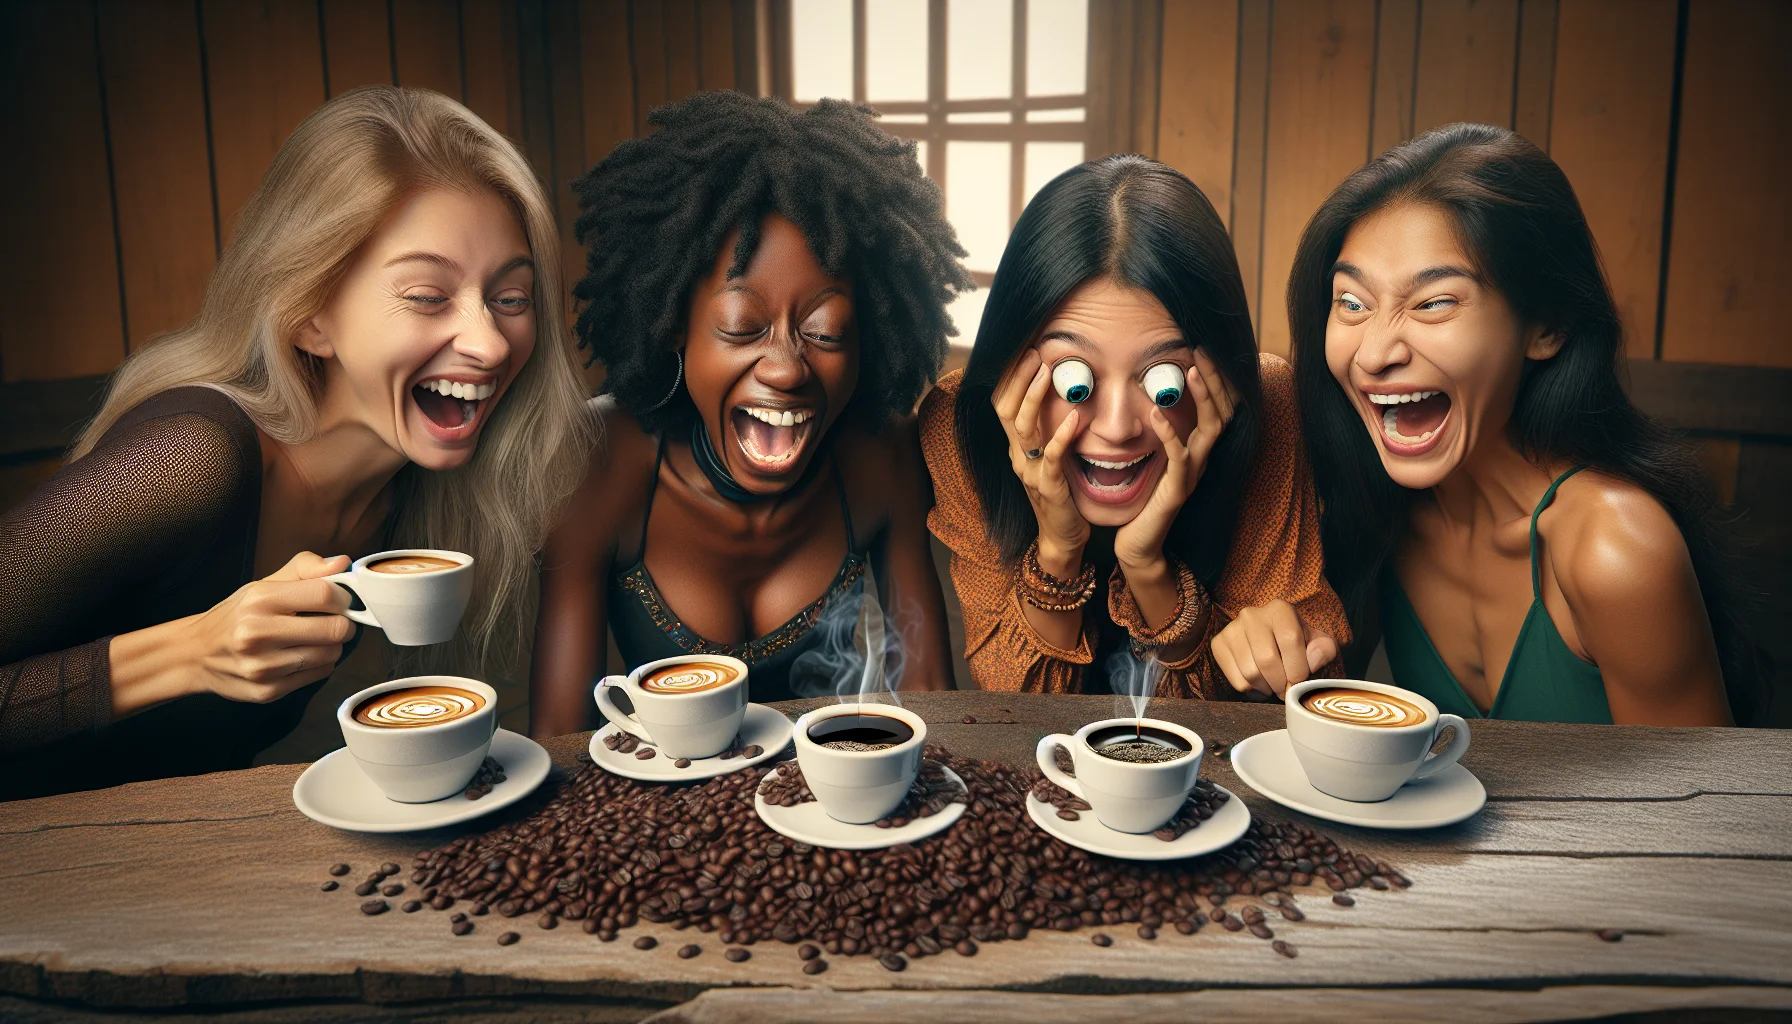 Create a humorous and realistic scene featuring four women of different descents: Caucasian, Black, Hispanic, and South Asian. Each of these women is a sister, joyfully participating in a novel coffee tasting ritual. They would be gathered around a rustic wooden table in a brightly lit room. On the table, they have four steaming cups of espresso made from dark roasted beans. One of the women, desperately in need of caffeine, oversizes her eyes comically at the sight of coffee. This image should emanate warmth and camaraderie, encouraging viewers to embark on their own coffee adventures.